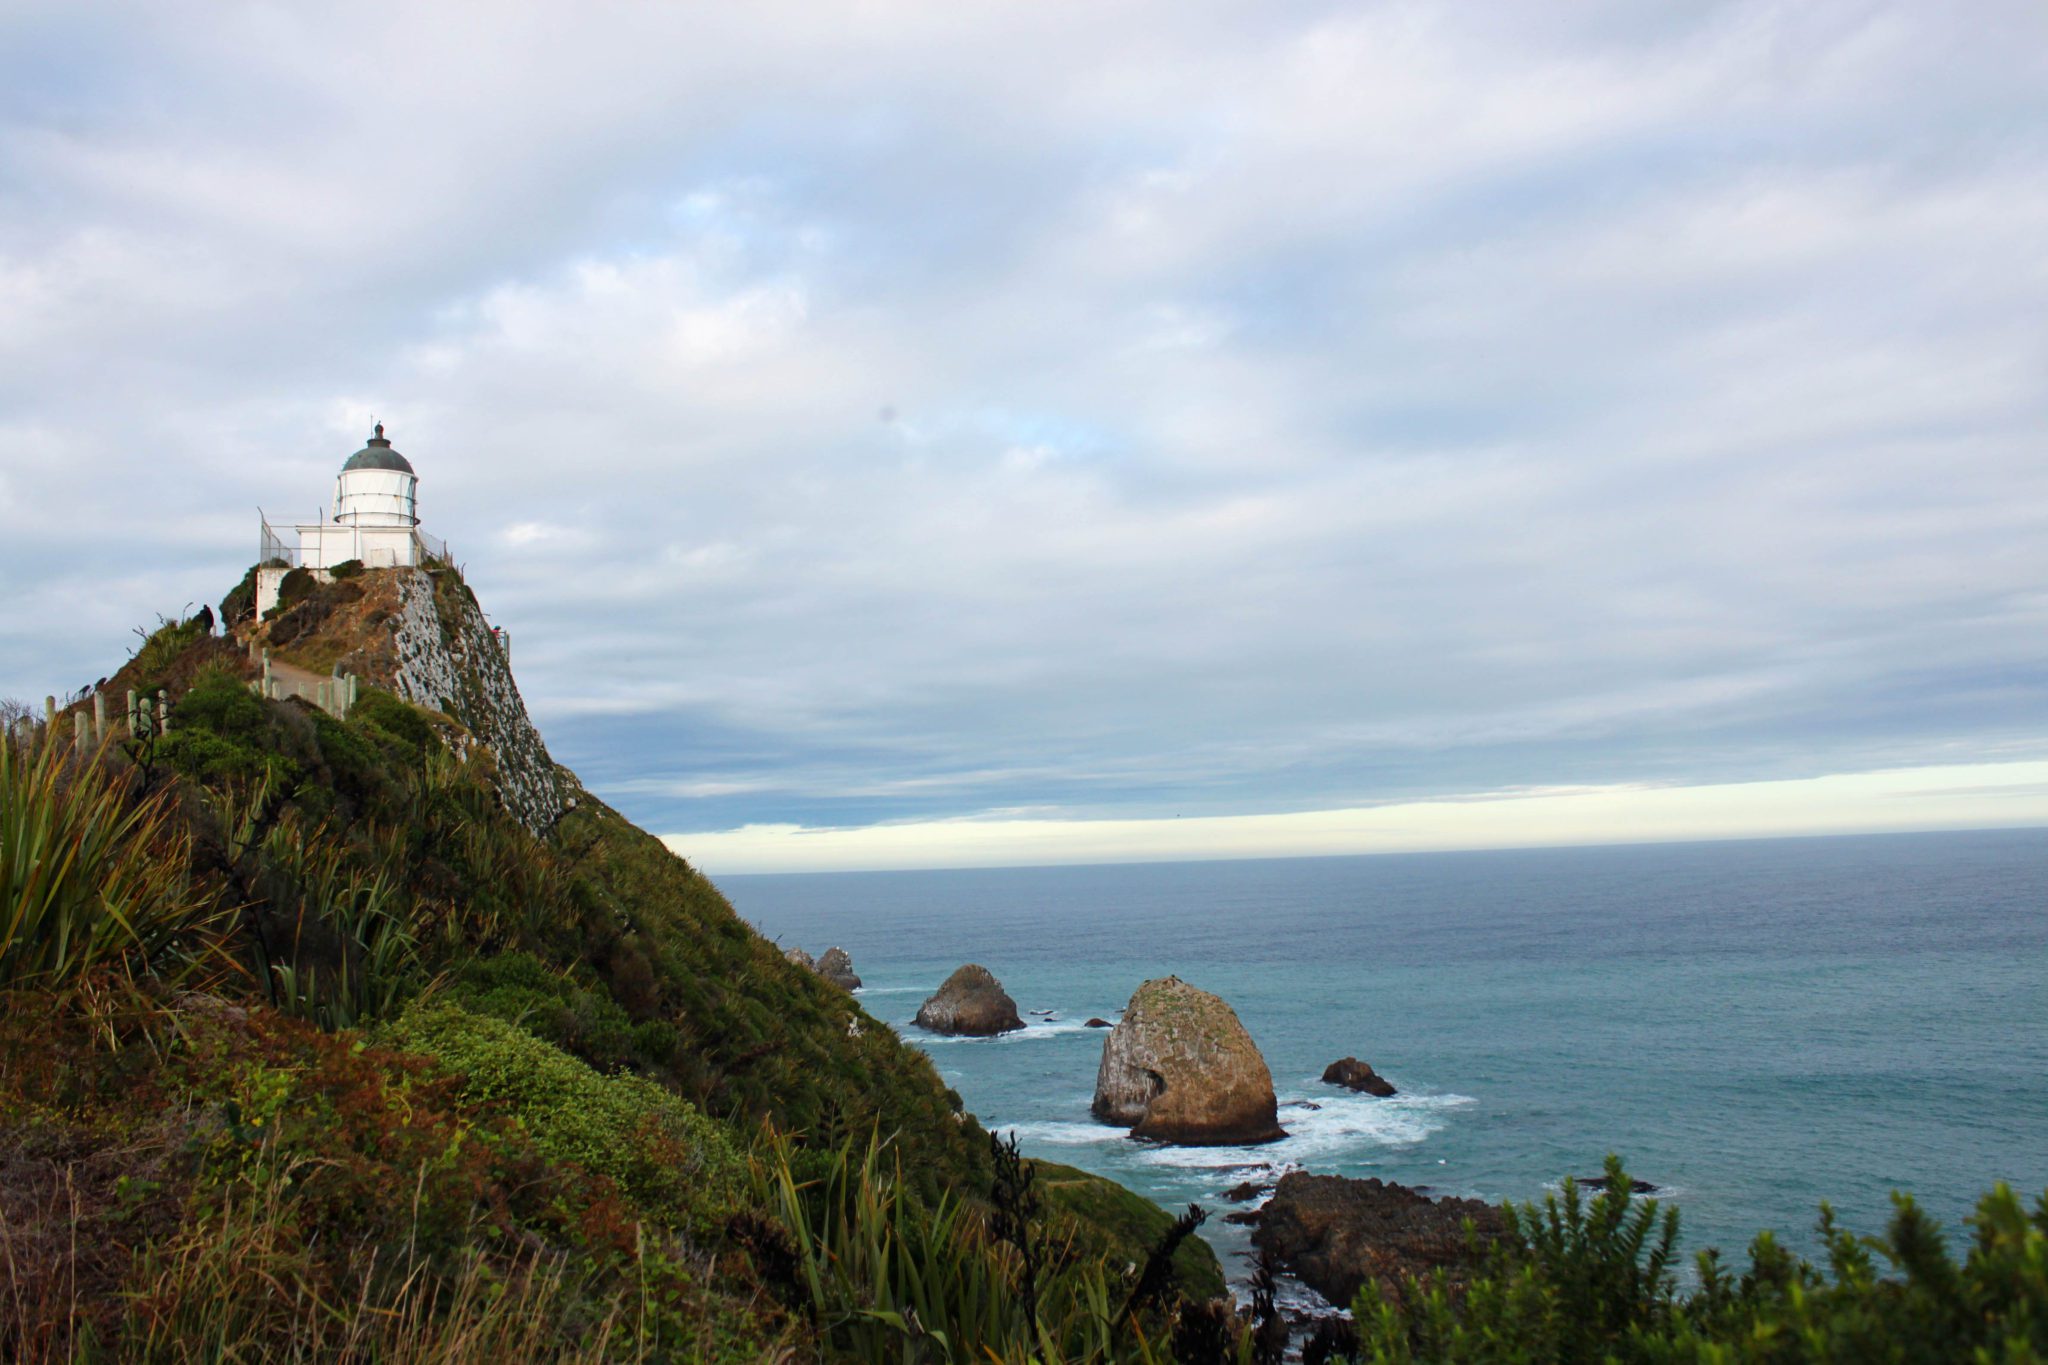 Discover the most beautiful lighthouse in New Zealand | 9 reasons why the Catlins needs to be on your New Zealand itinerary #newzealand #thecatlins #nuggetpoint #simplywander